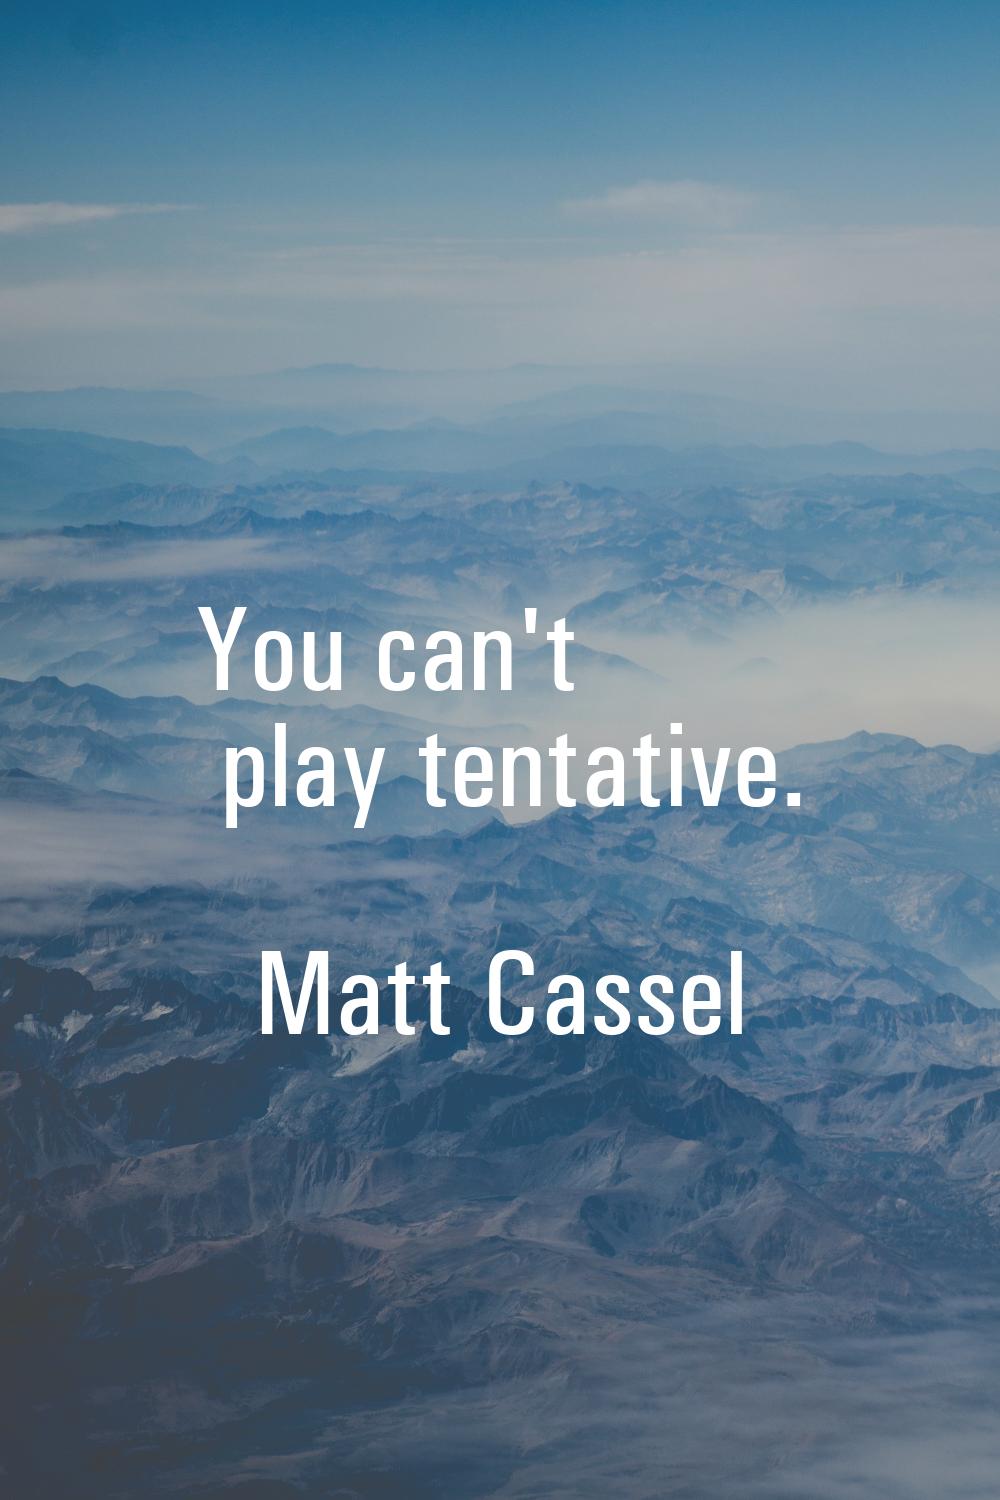 You can't play tentative.